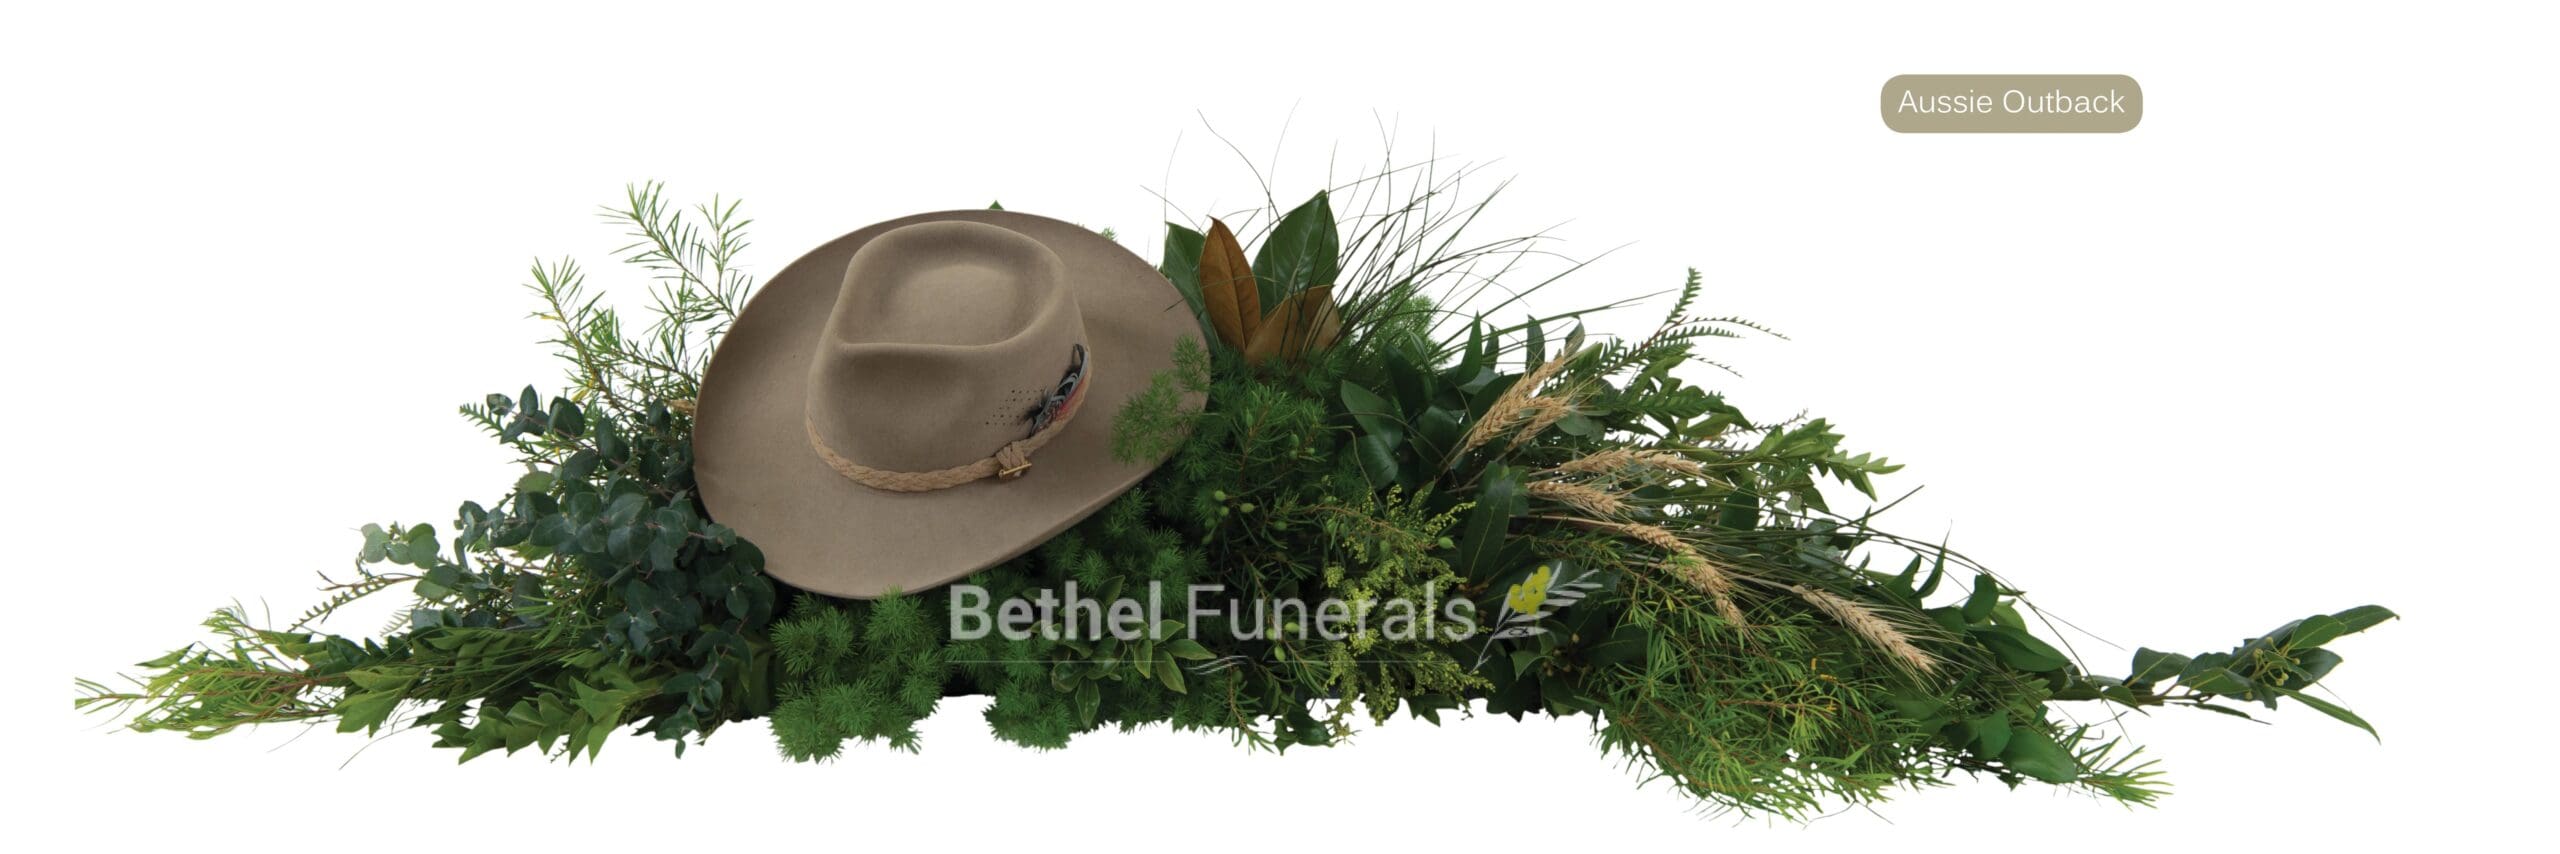 aussie outback funeral flowers